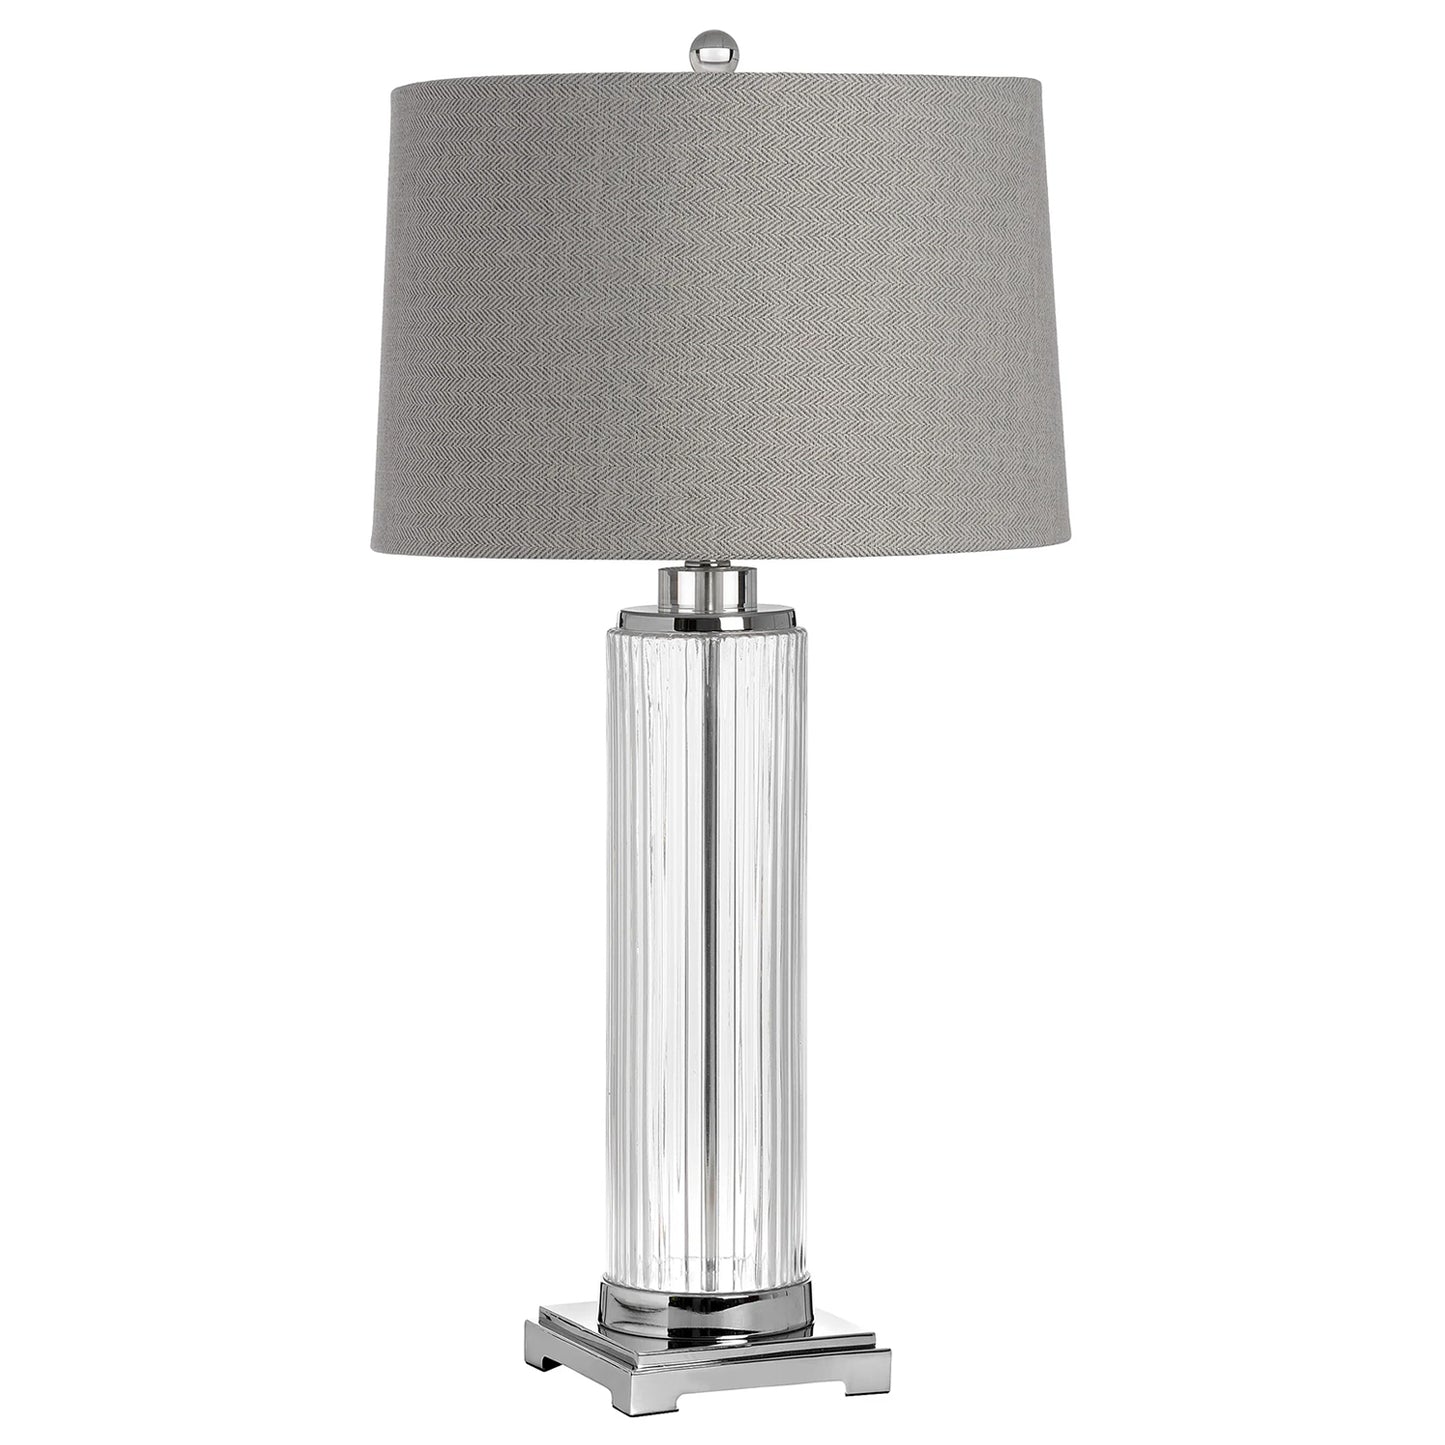 Roma Table Lamp by Hill Interiors